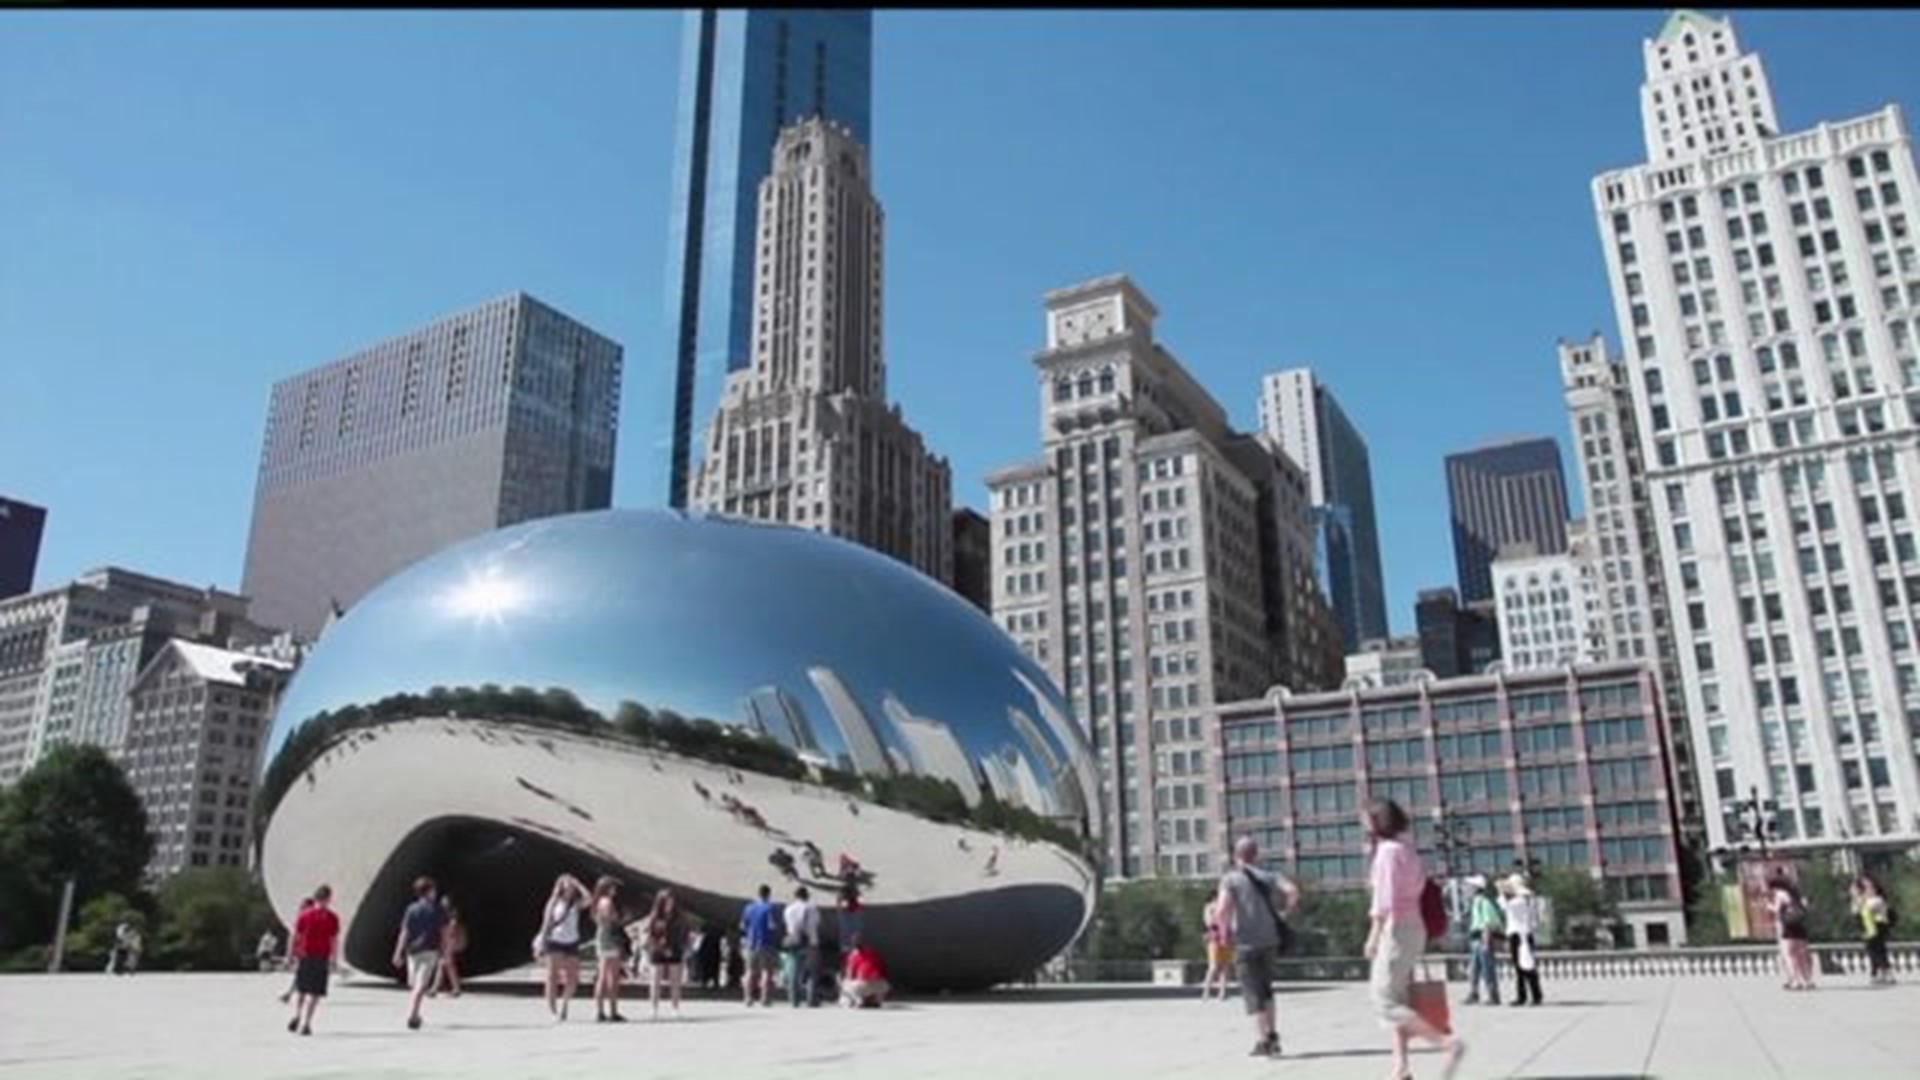 Illinois Tourism Director Talks About Daytrips and Summer Vacation